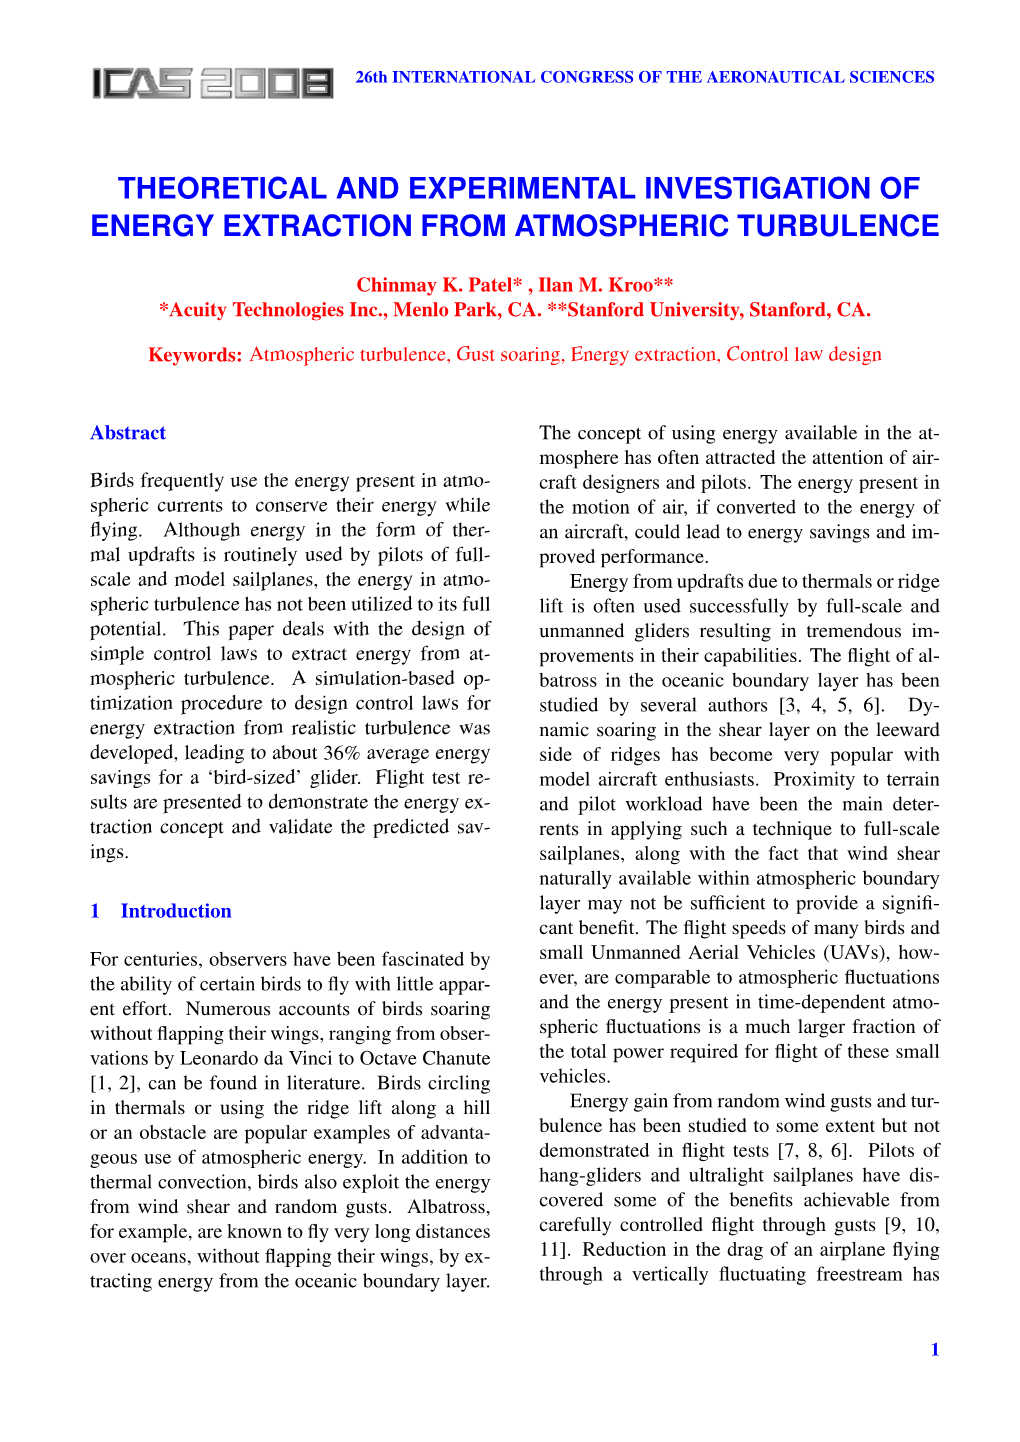 Theoretical and Experimental Investigation of Energy Extraction from Atmospheric Turbulence